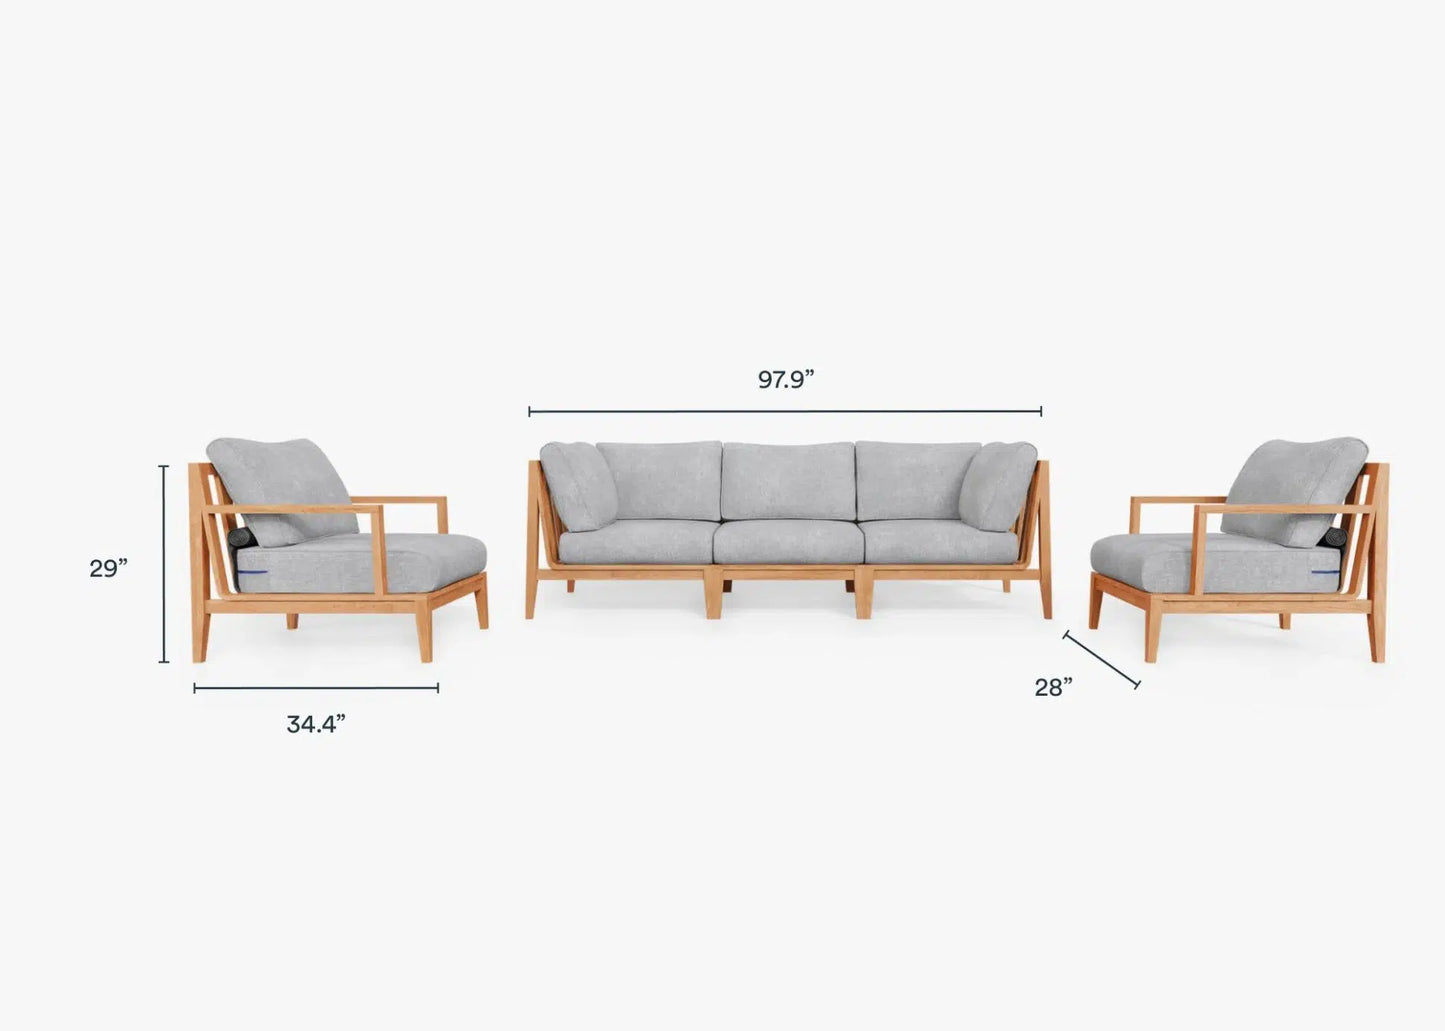 Live Outer 98" Teak Outdoor Sofa With Armchairs and Pacific Fog Gray Cushion (5-Seat)